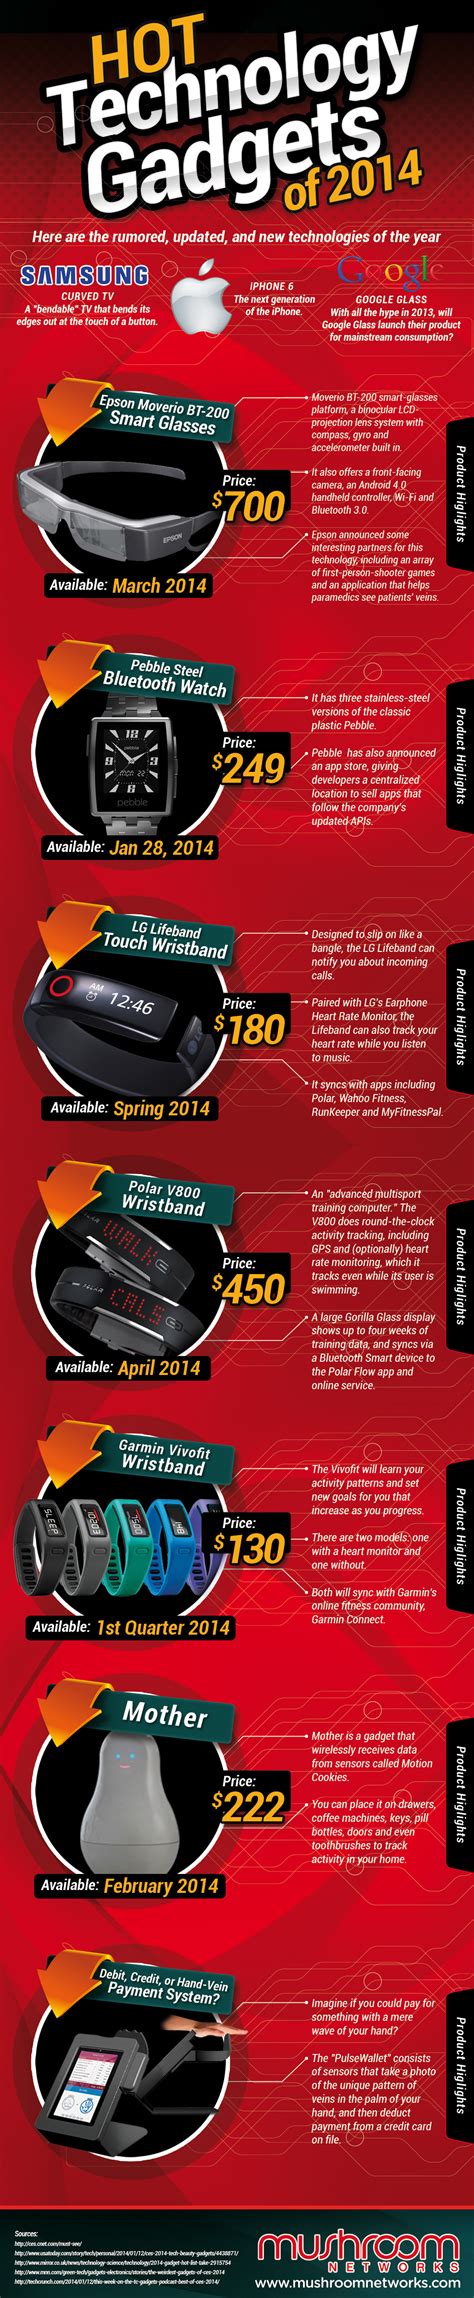 Hot Technology Gadgets Of 2014 Infographic Visualistan